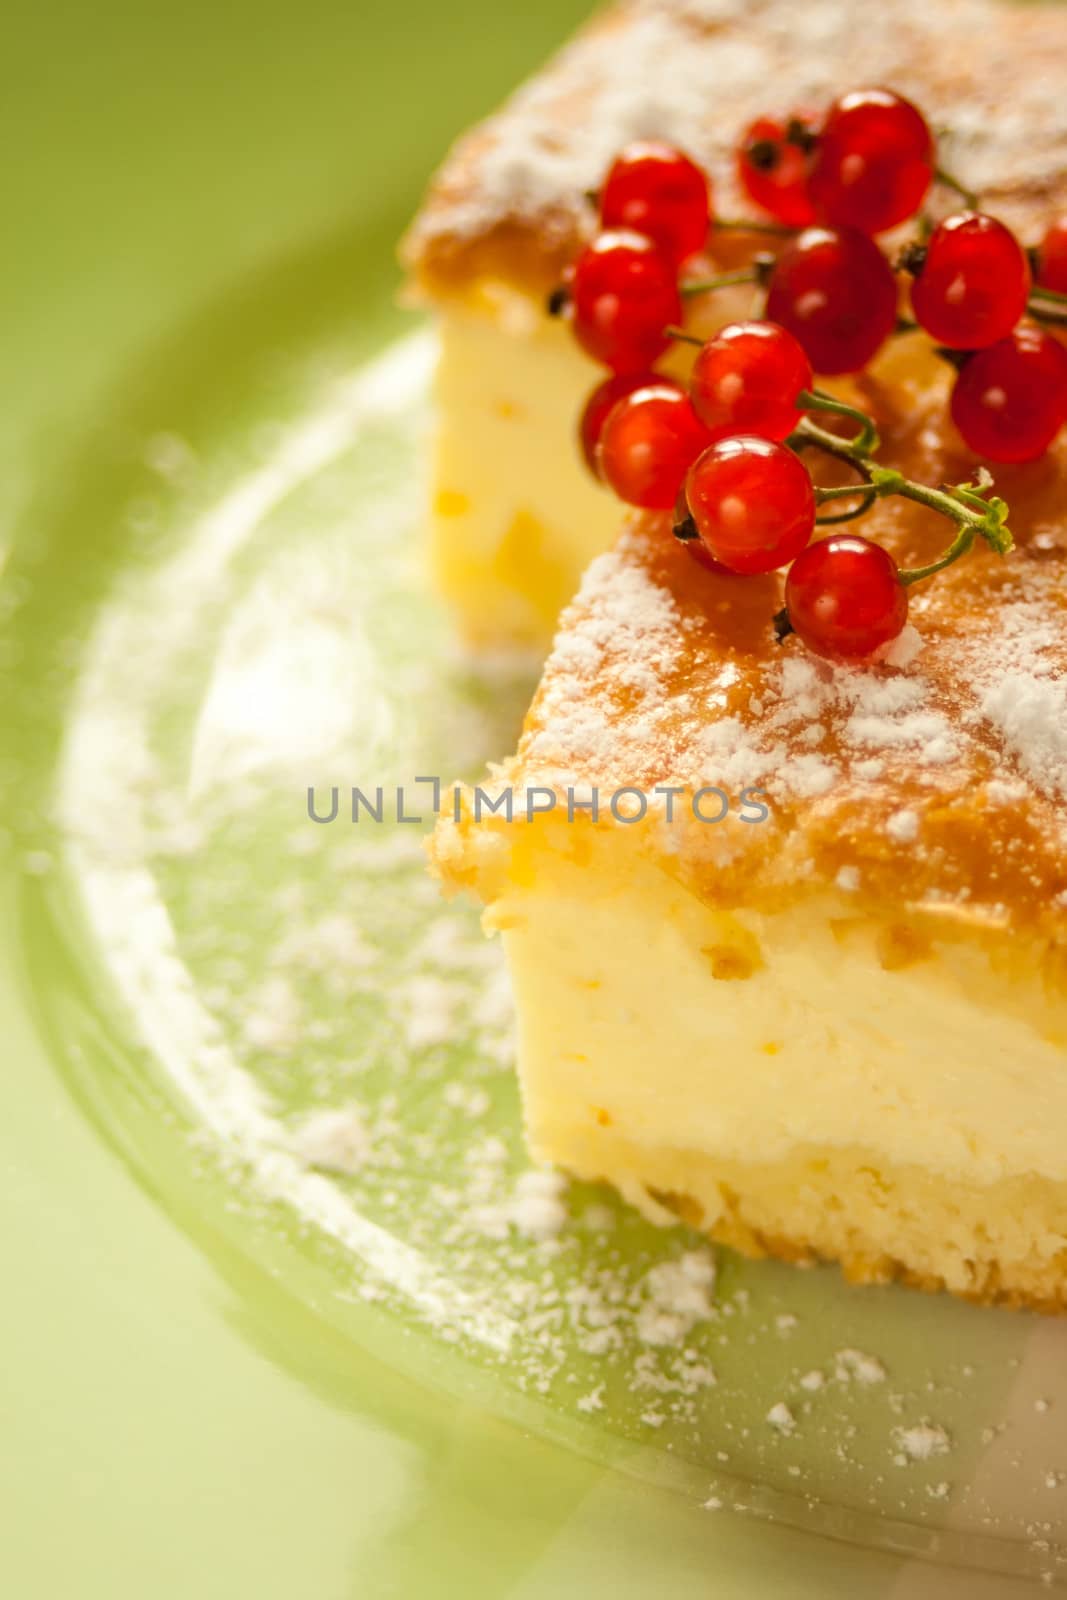 Home made Cheese cake with fruits on a plate.